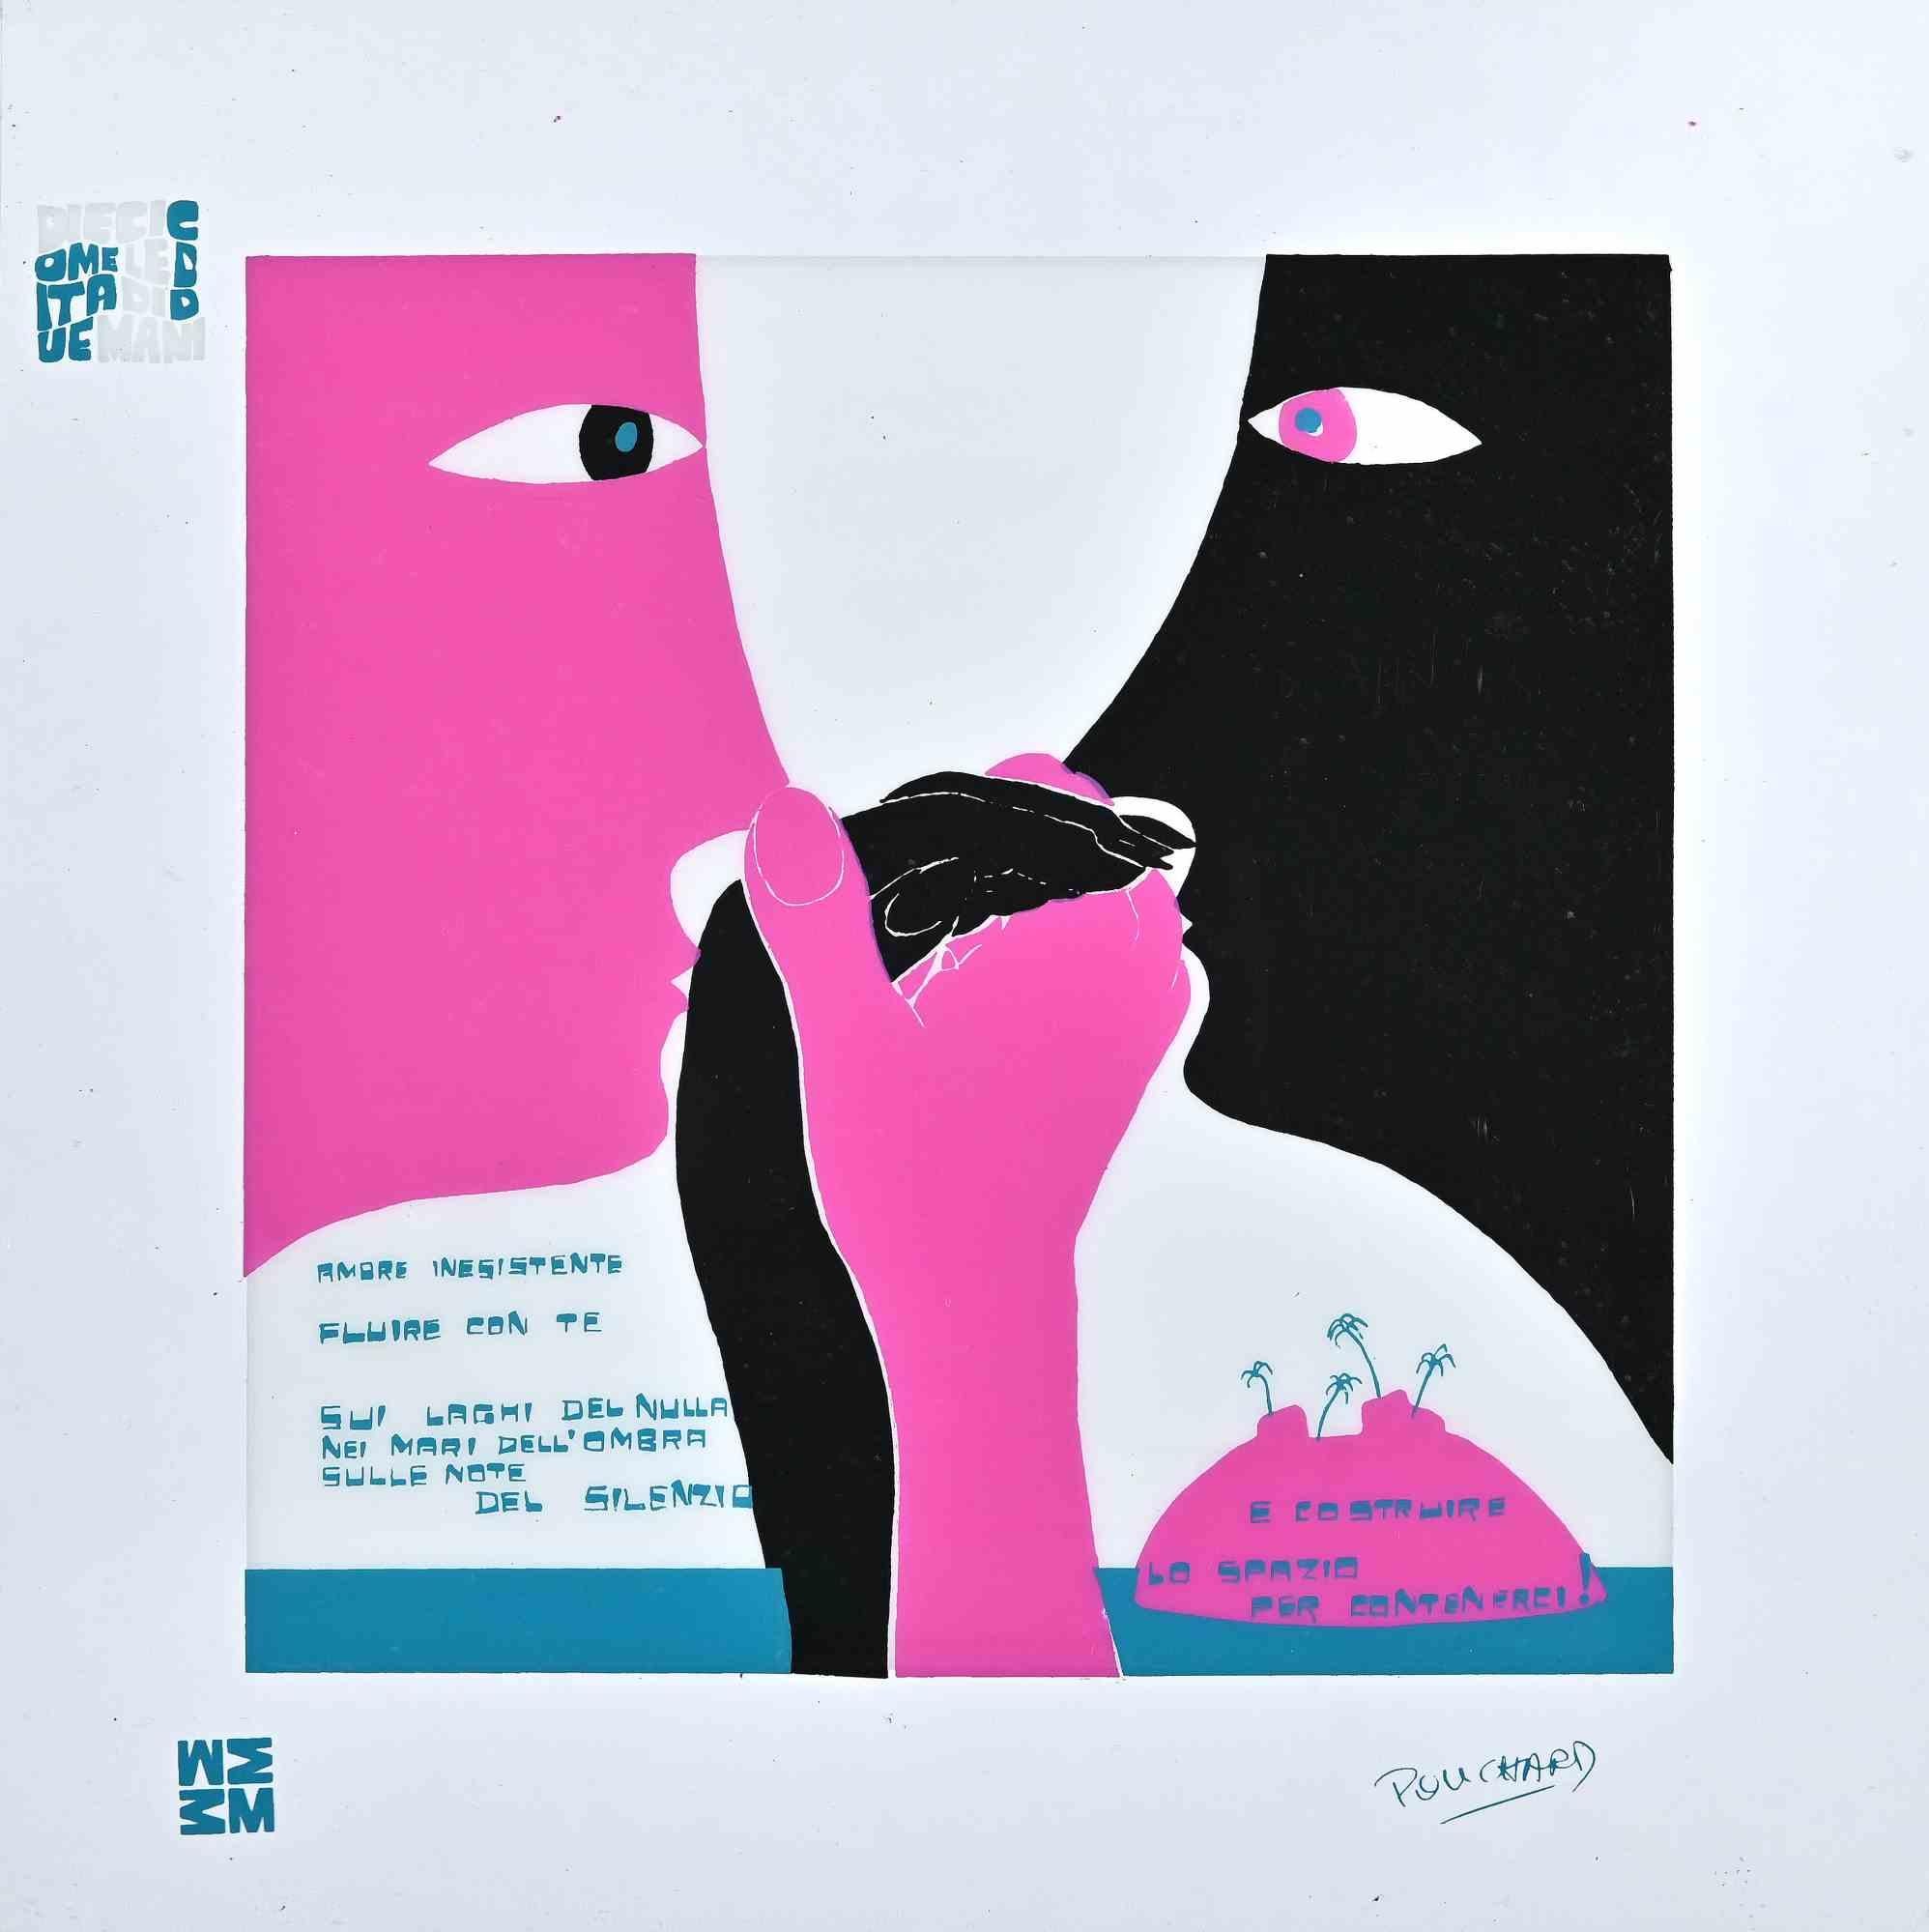 Fluire con Te - Diecicomeleditadiduemani is a color silk-screen print on acetates, realized in  1973  by the artist  Ennio Pouchard  (1928).

Signed on plate  on the lower right.

From the porfolio " Diecicomeleditadiduemani ", containing 10